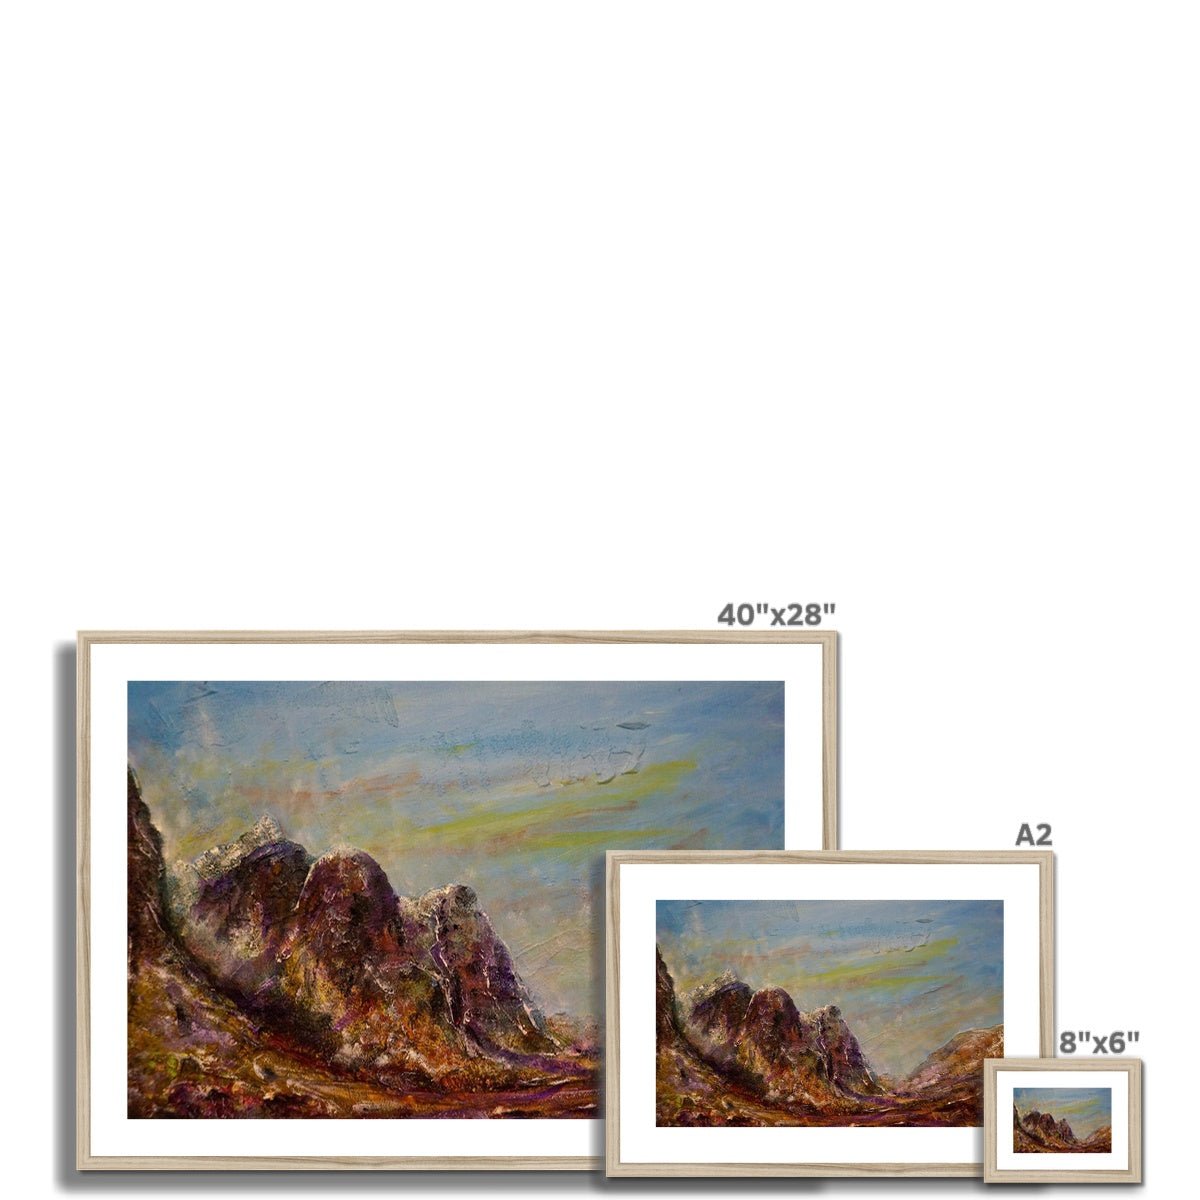 Three Sisters Glencoe Painting | Framed & Mounted Prints From Scotland-Framed & Mounted Prints-Glencoe Art Gallery-Paintings, Prints, Homeware, Art Gifts From Scotland By Scottish Artist Kevin Hunter